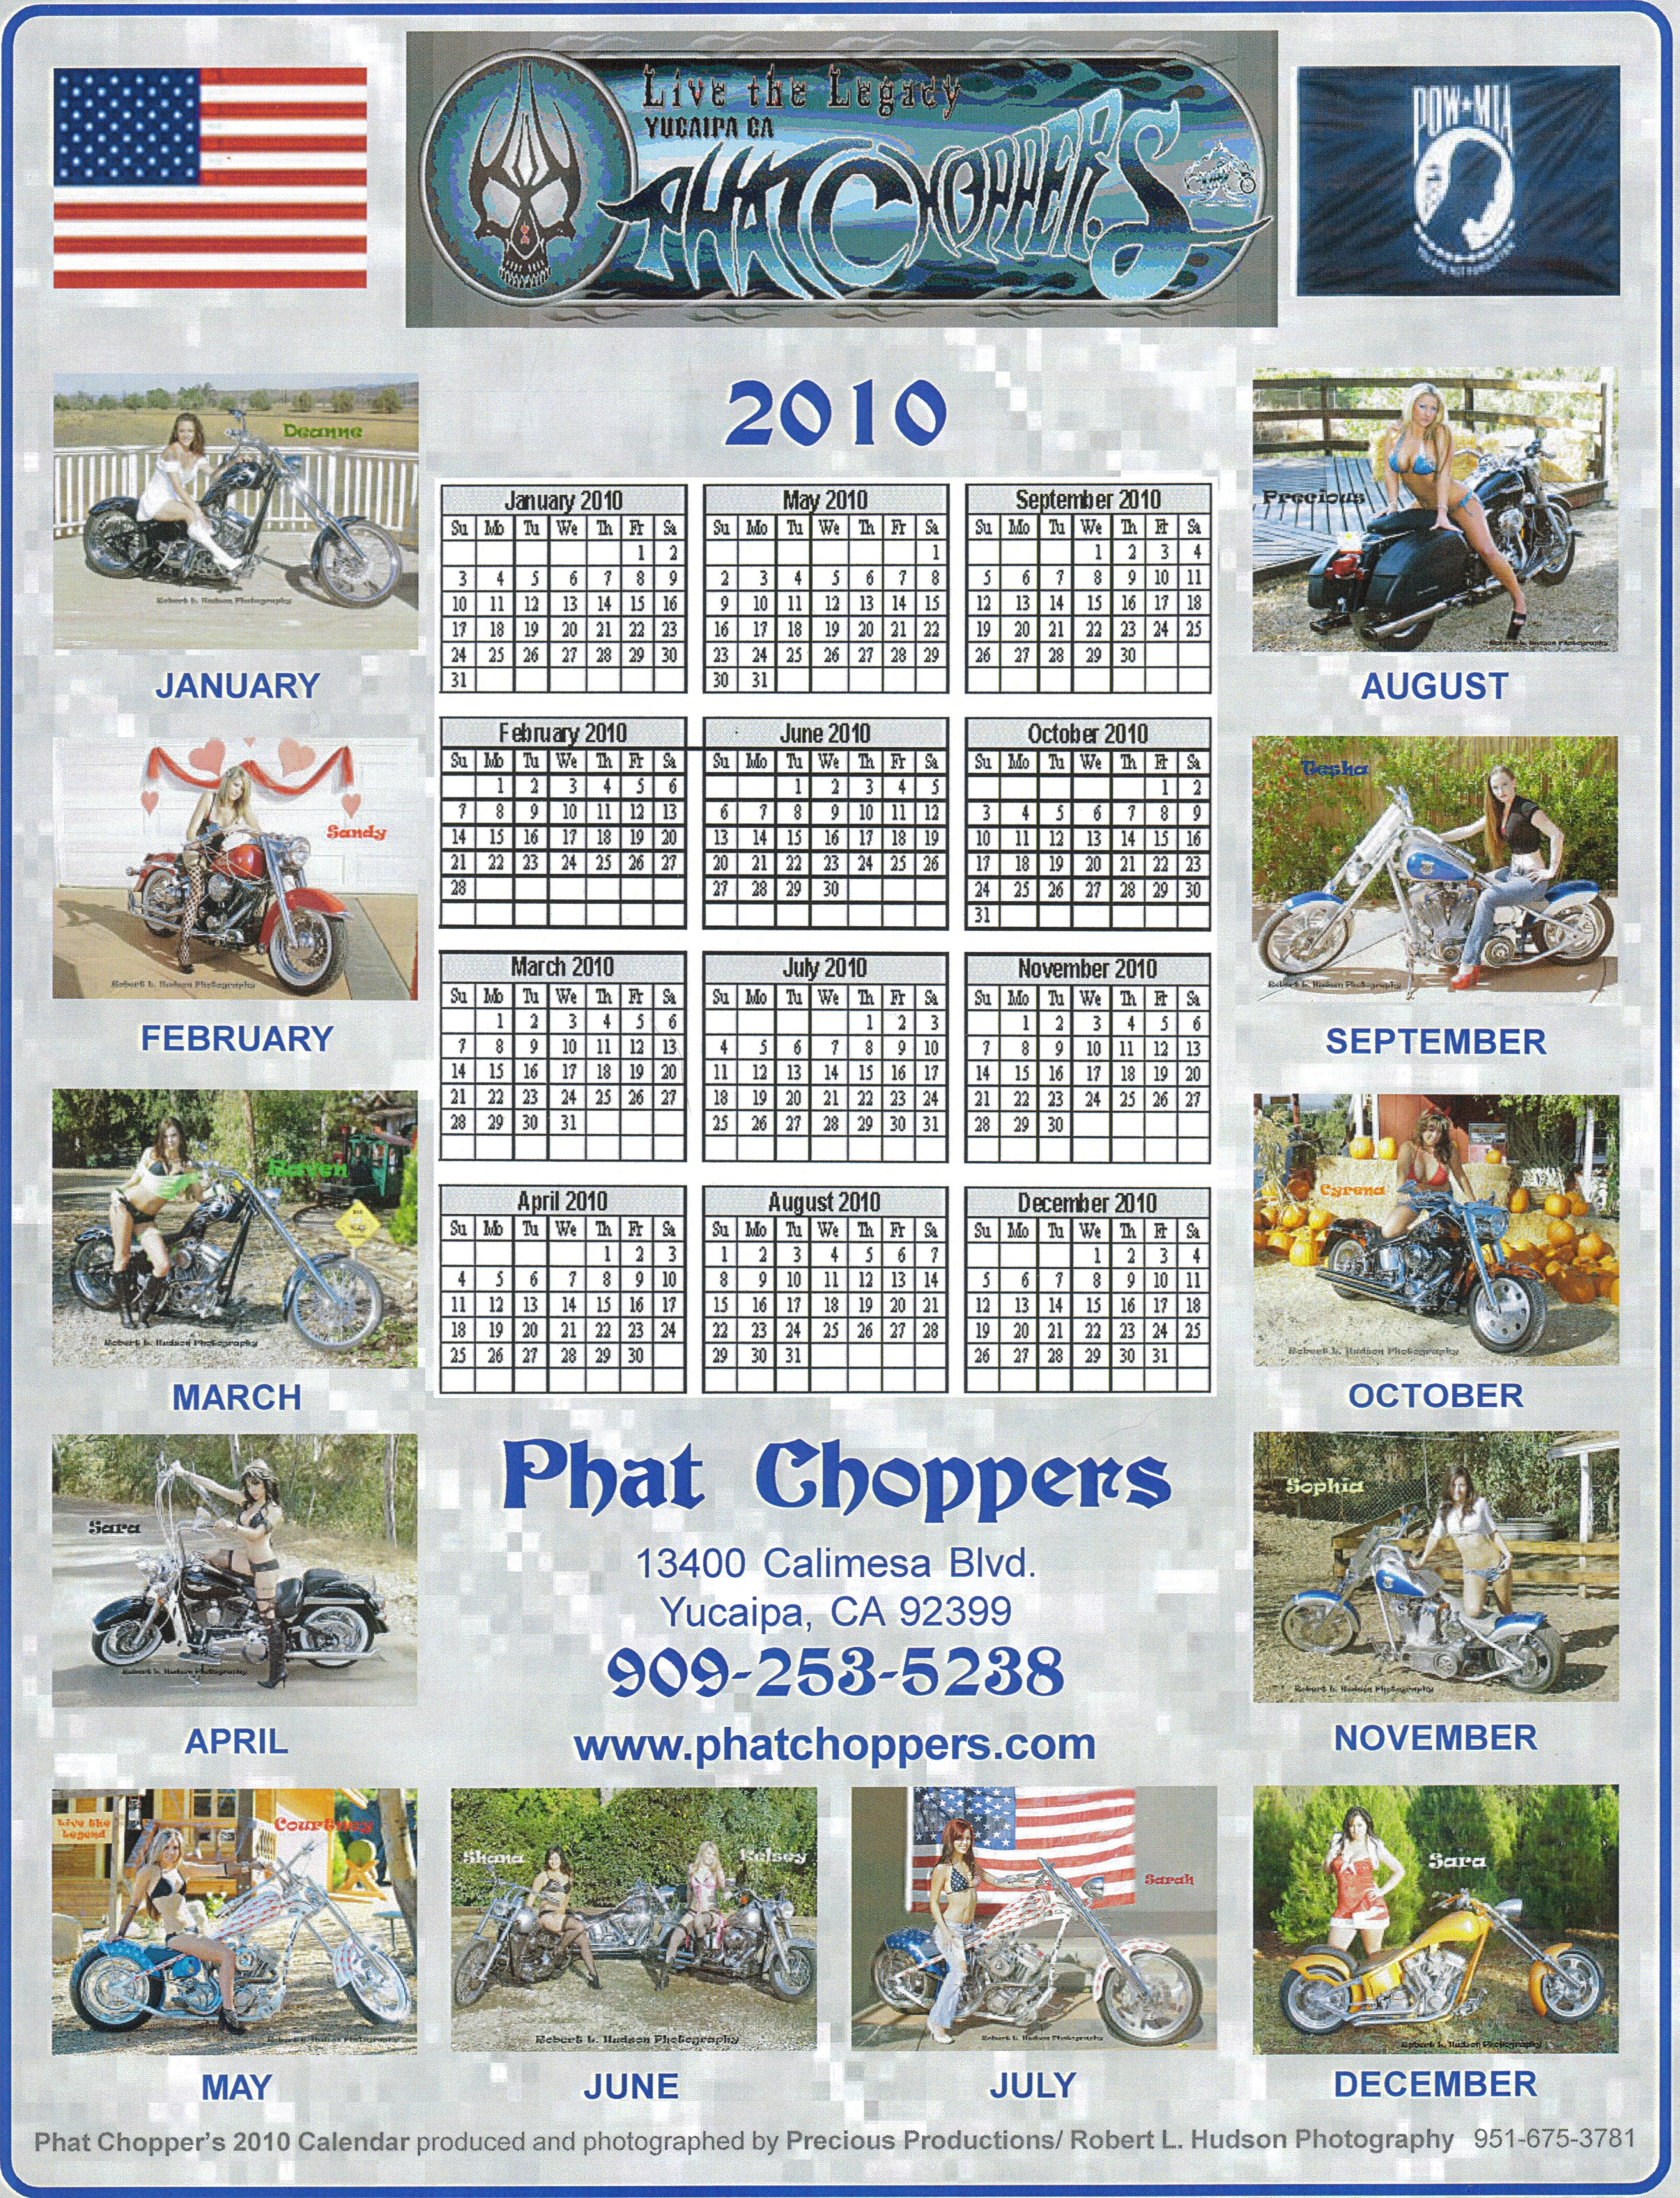 CLICK TO GET YOUR PHAT CHOPPERS CALENDAR